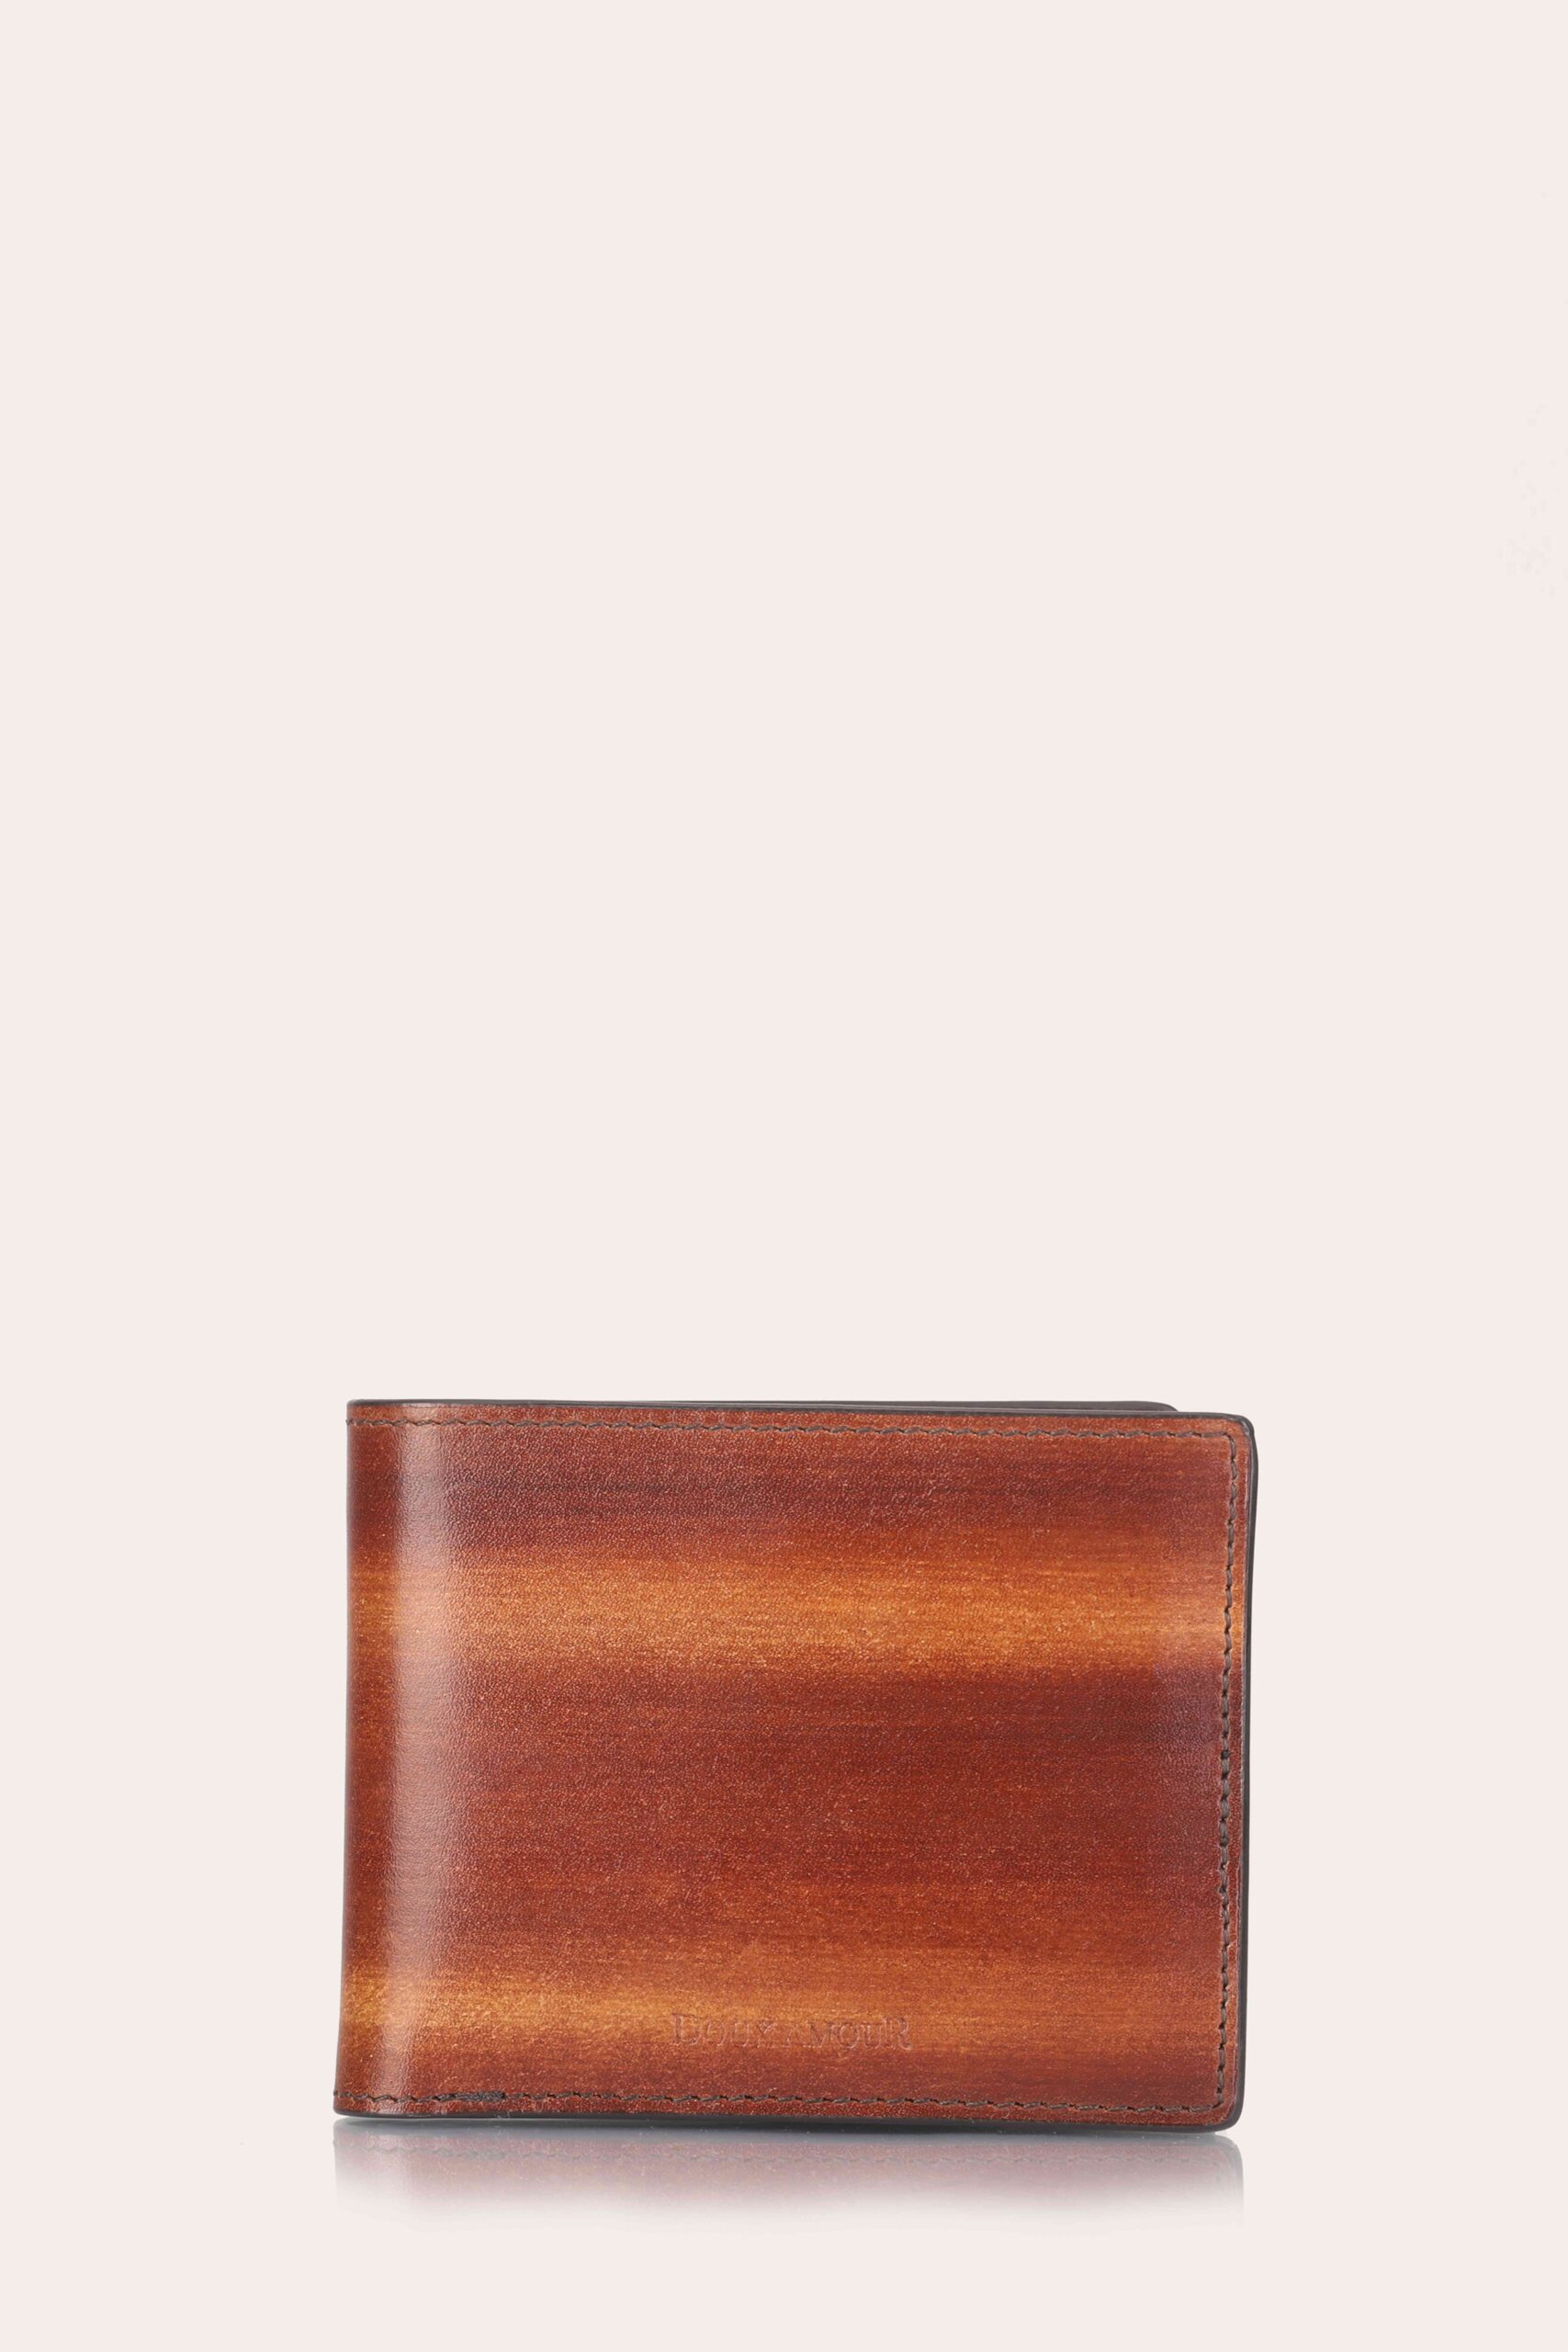 ALFRED BILL FOLD WALLET AND CARD HOLDER- TEAK – Doux Amour